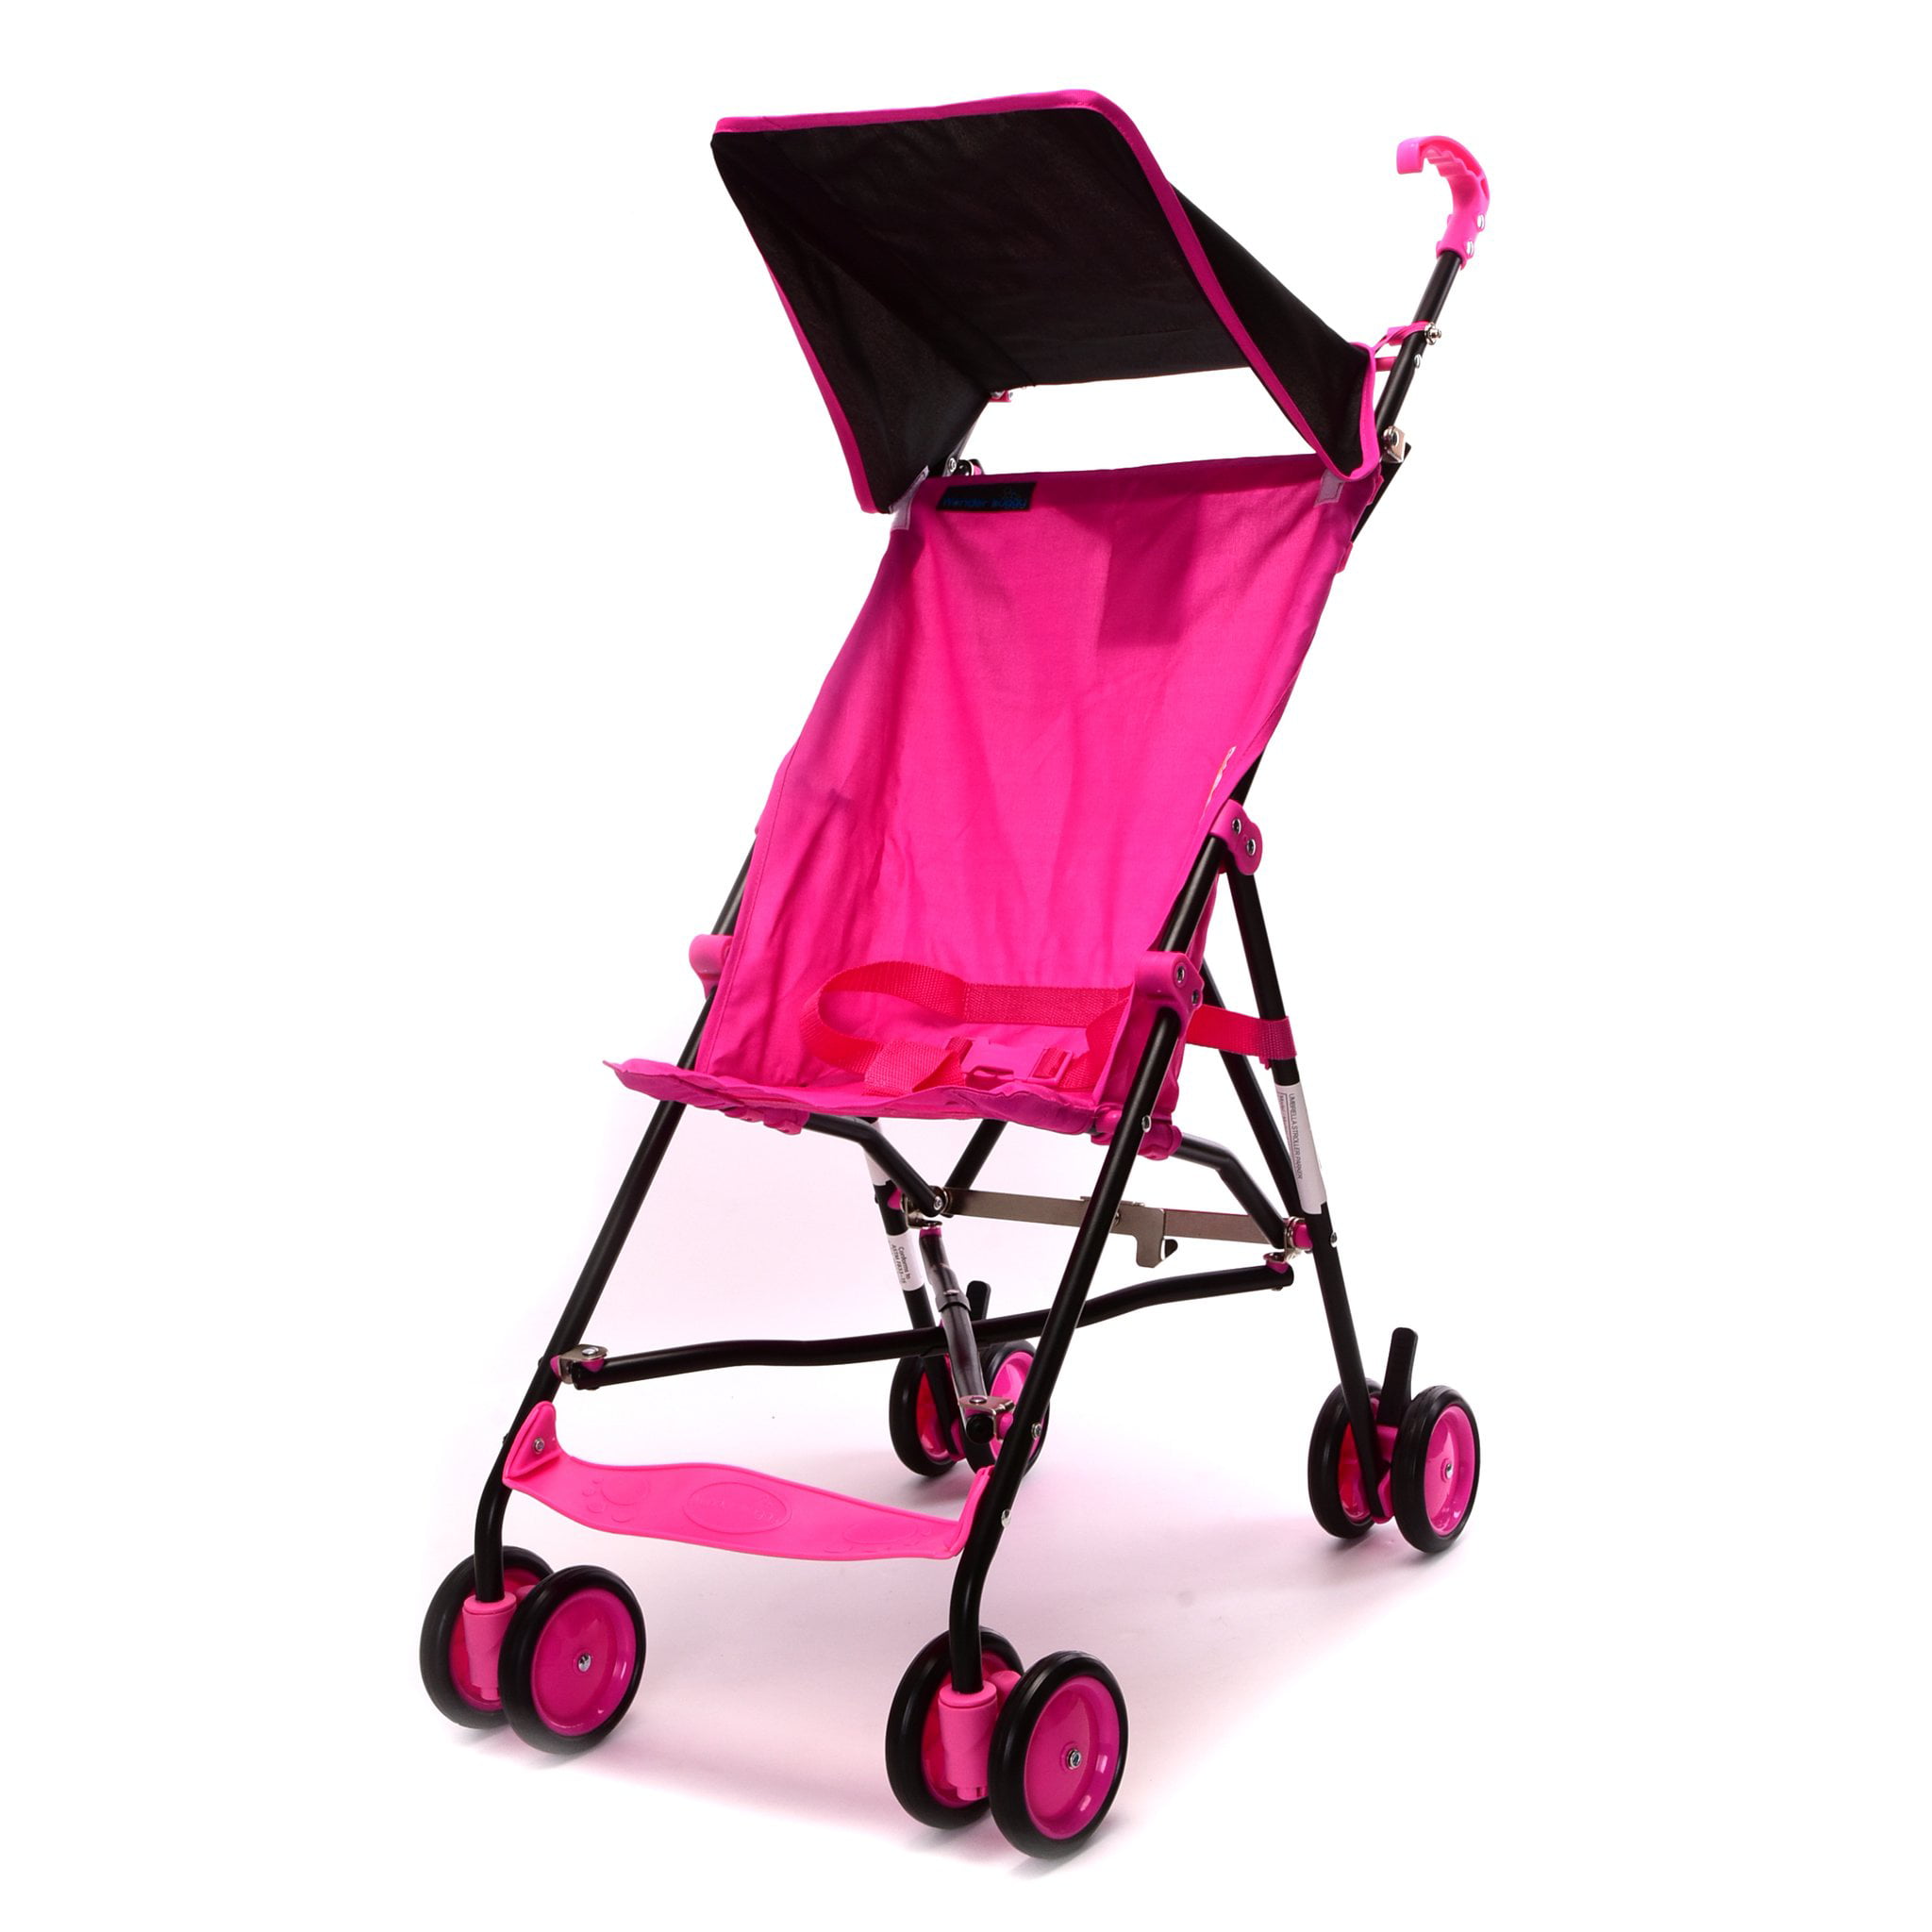 cheap umbrella stroller with canopy